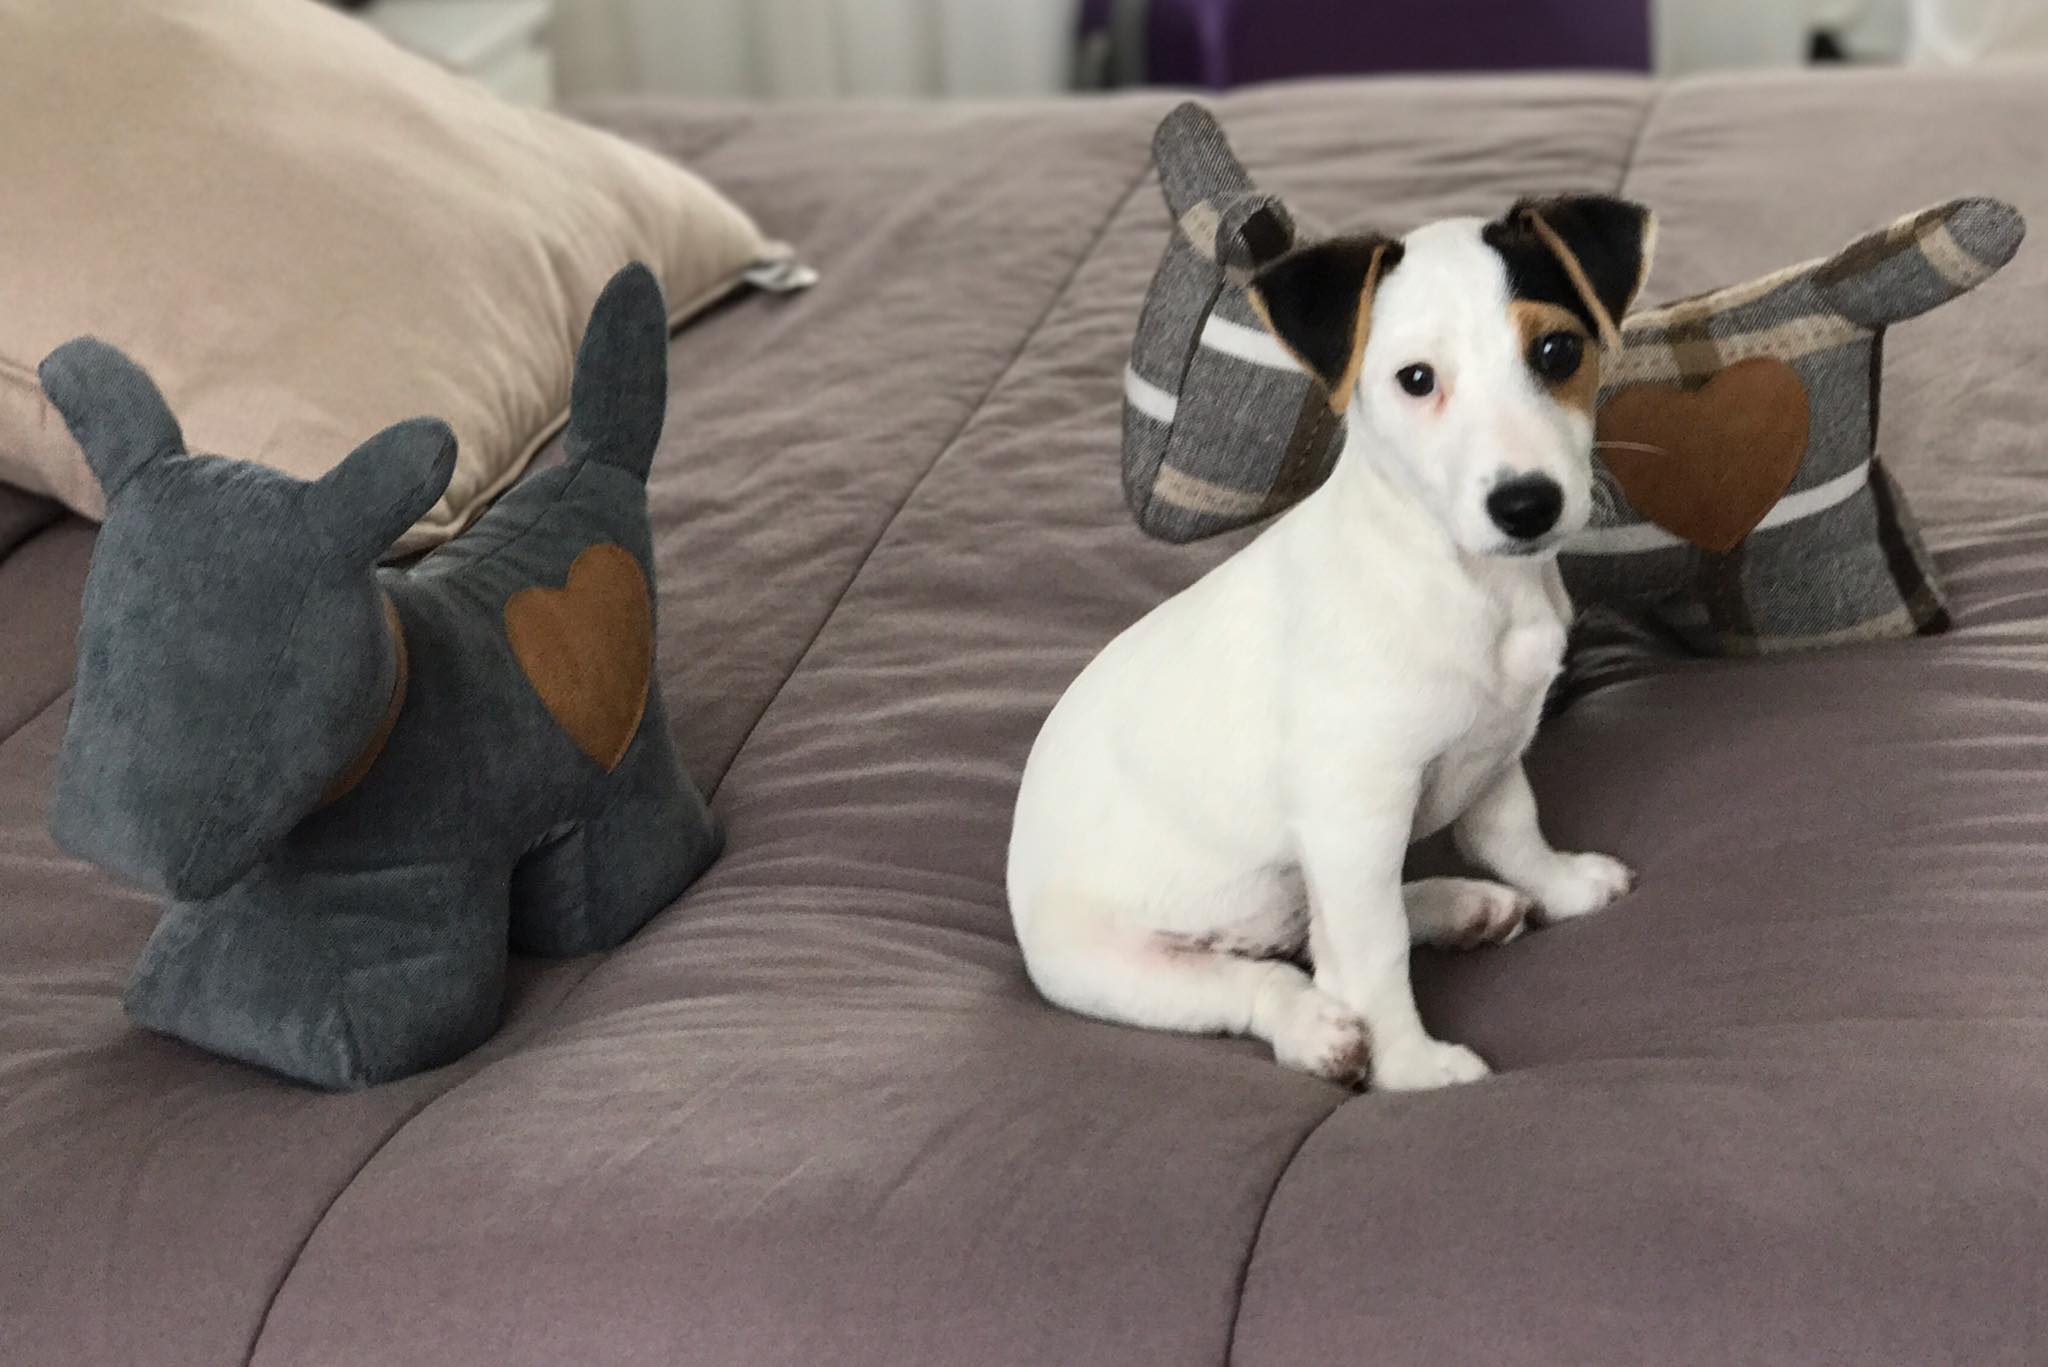 A Jack Russell Terrier puppy sitting on the bed with its stuffed toys